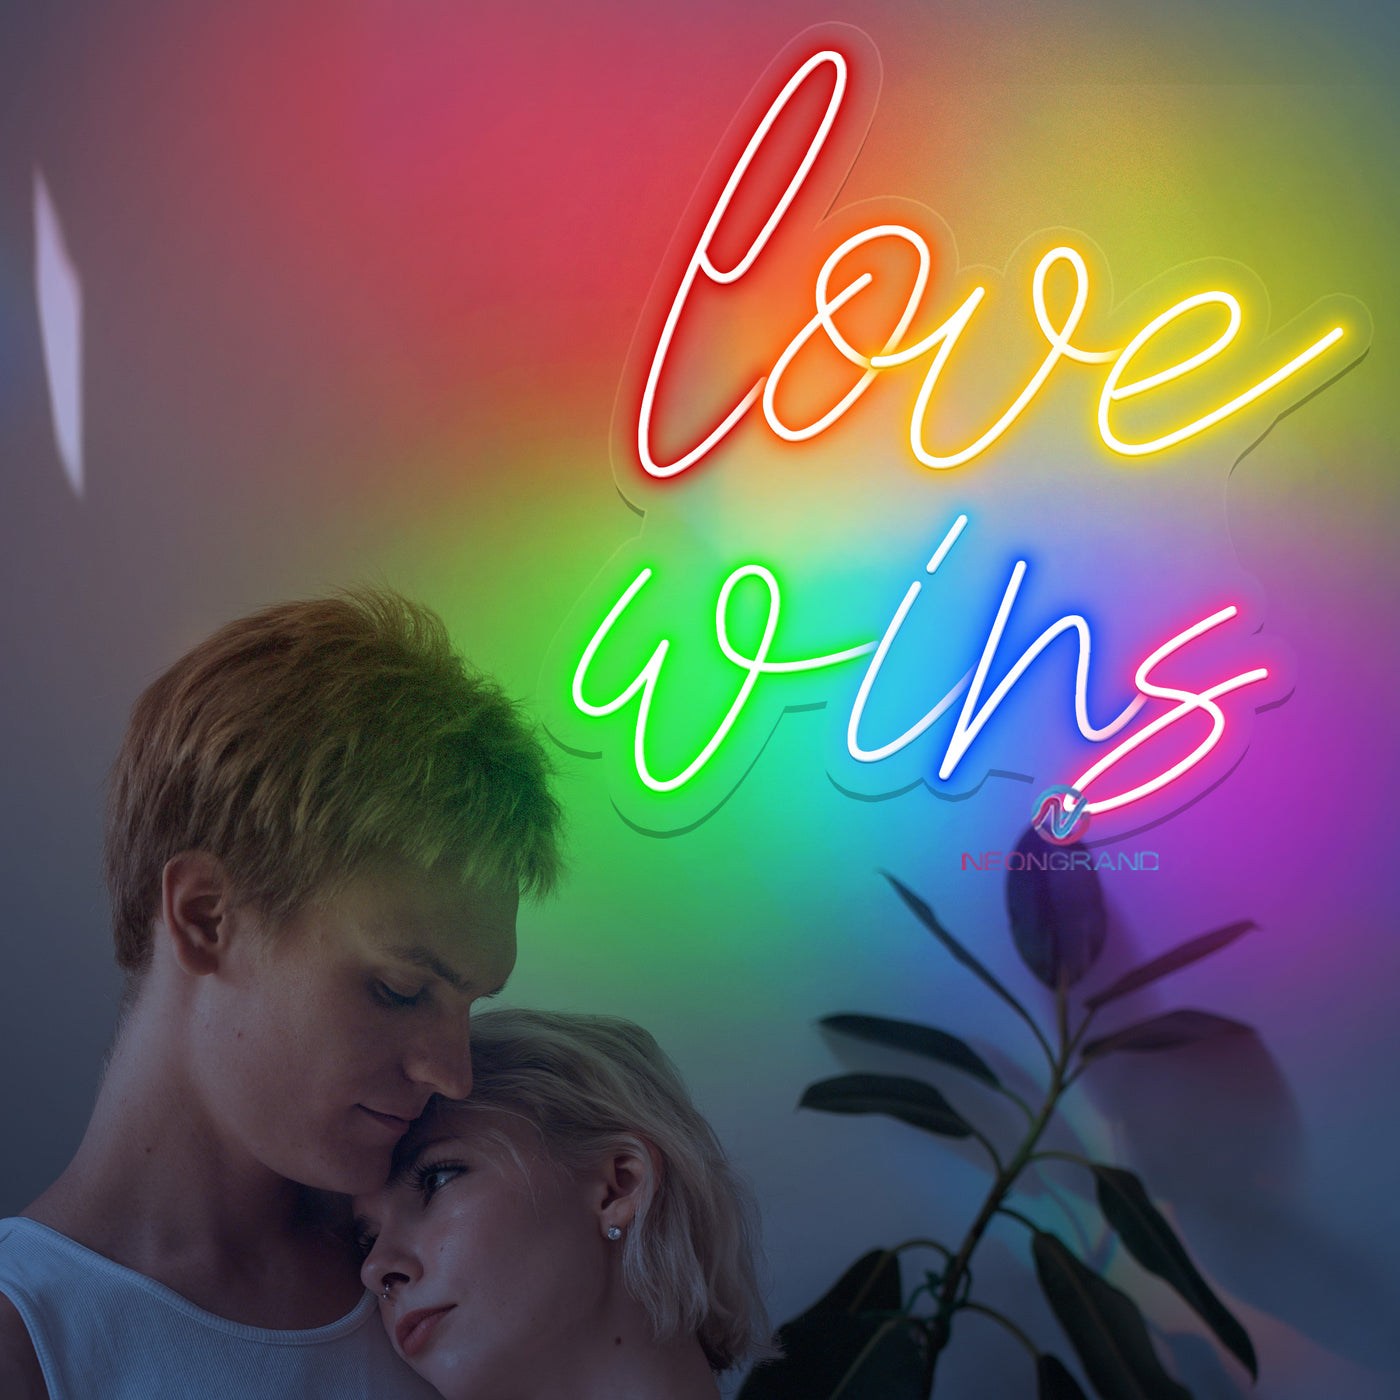 Love Wins Neon Sign Led Light, Love LGBT Neon Signs